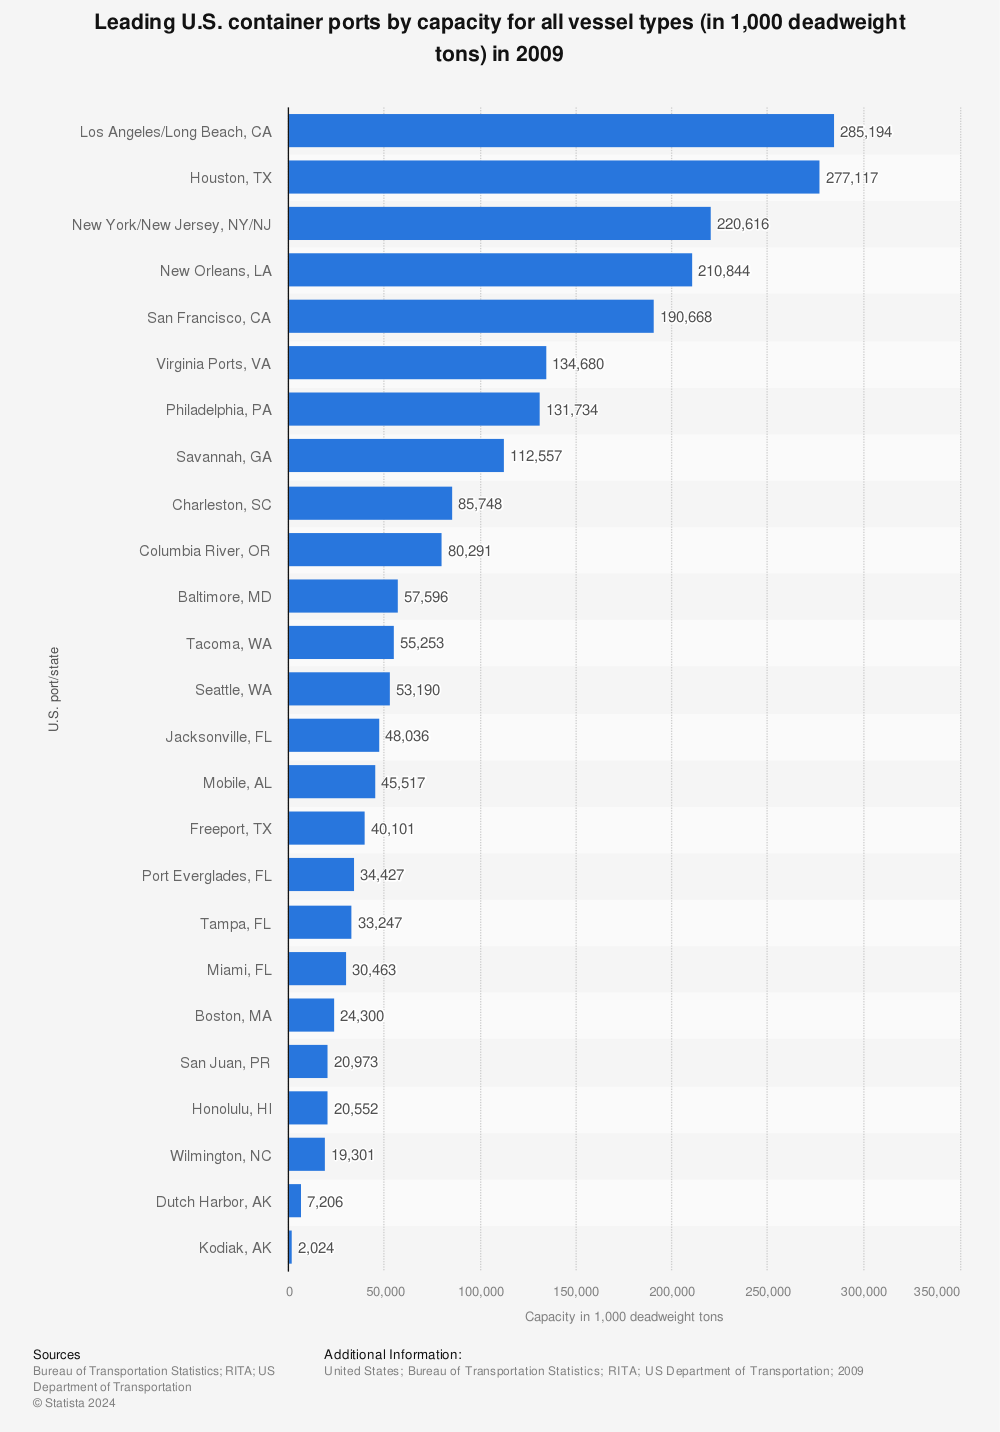 Statistic: Leading U.S. container ports by capacity for all vessel types (in 1,000 deadweight tons) in 2009 | Statista